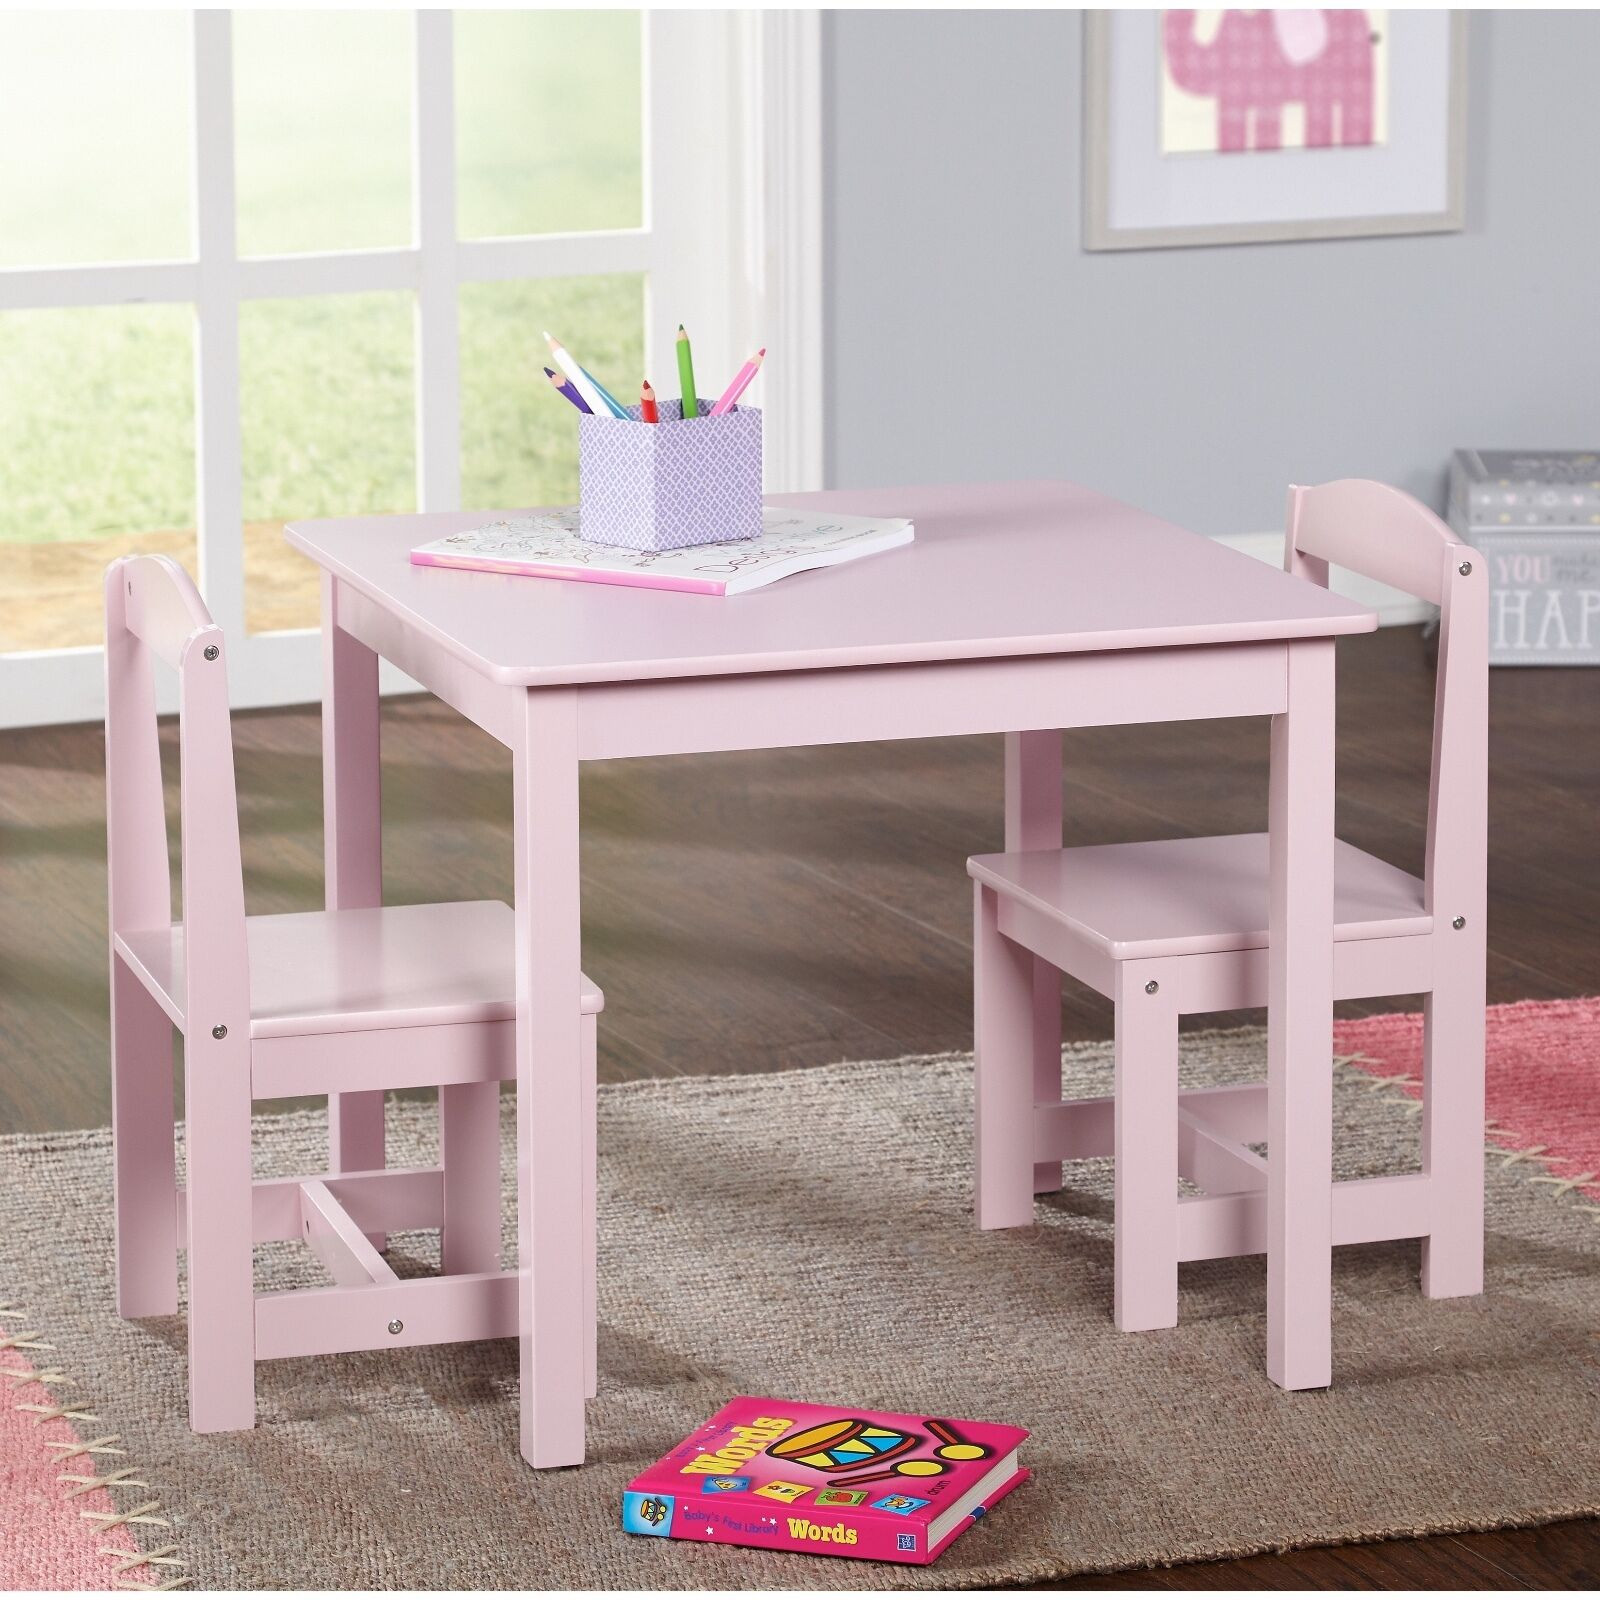 Kids Table And Bench Set
 Study Small Table and Chair Set Generic 3 Piece Wood